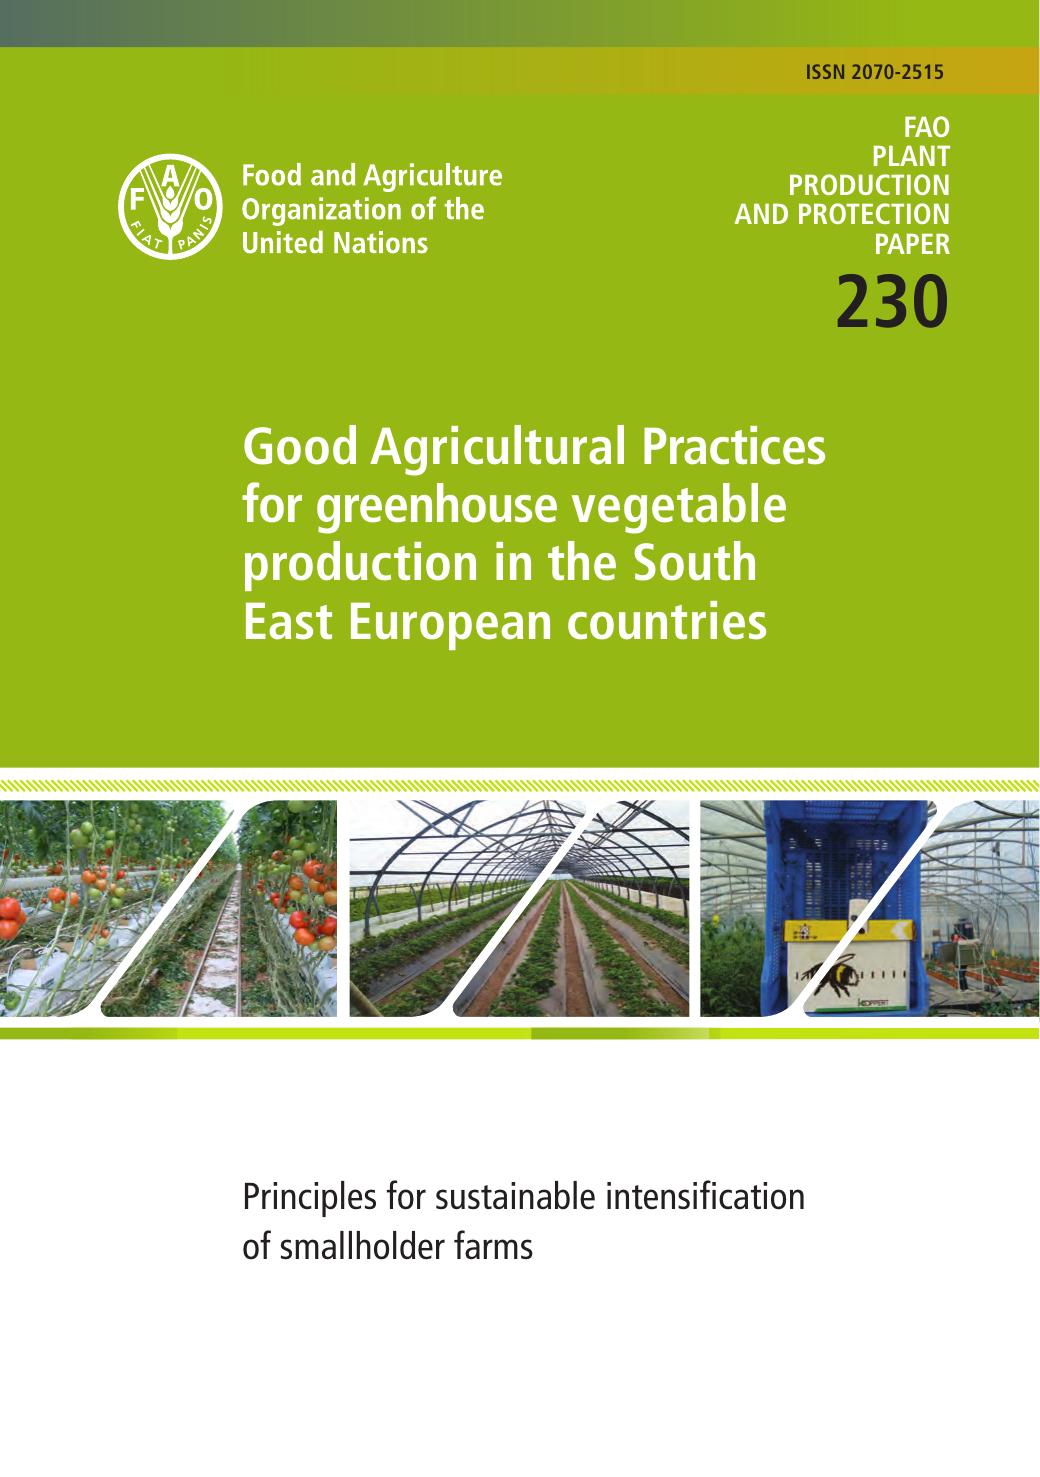 GOOD AGRICULTURAL PRACTICES FOR GREENHOUSE VEGETABLE PRODUCTION 2017